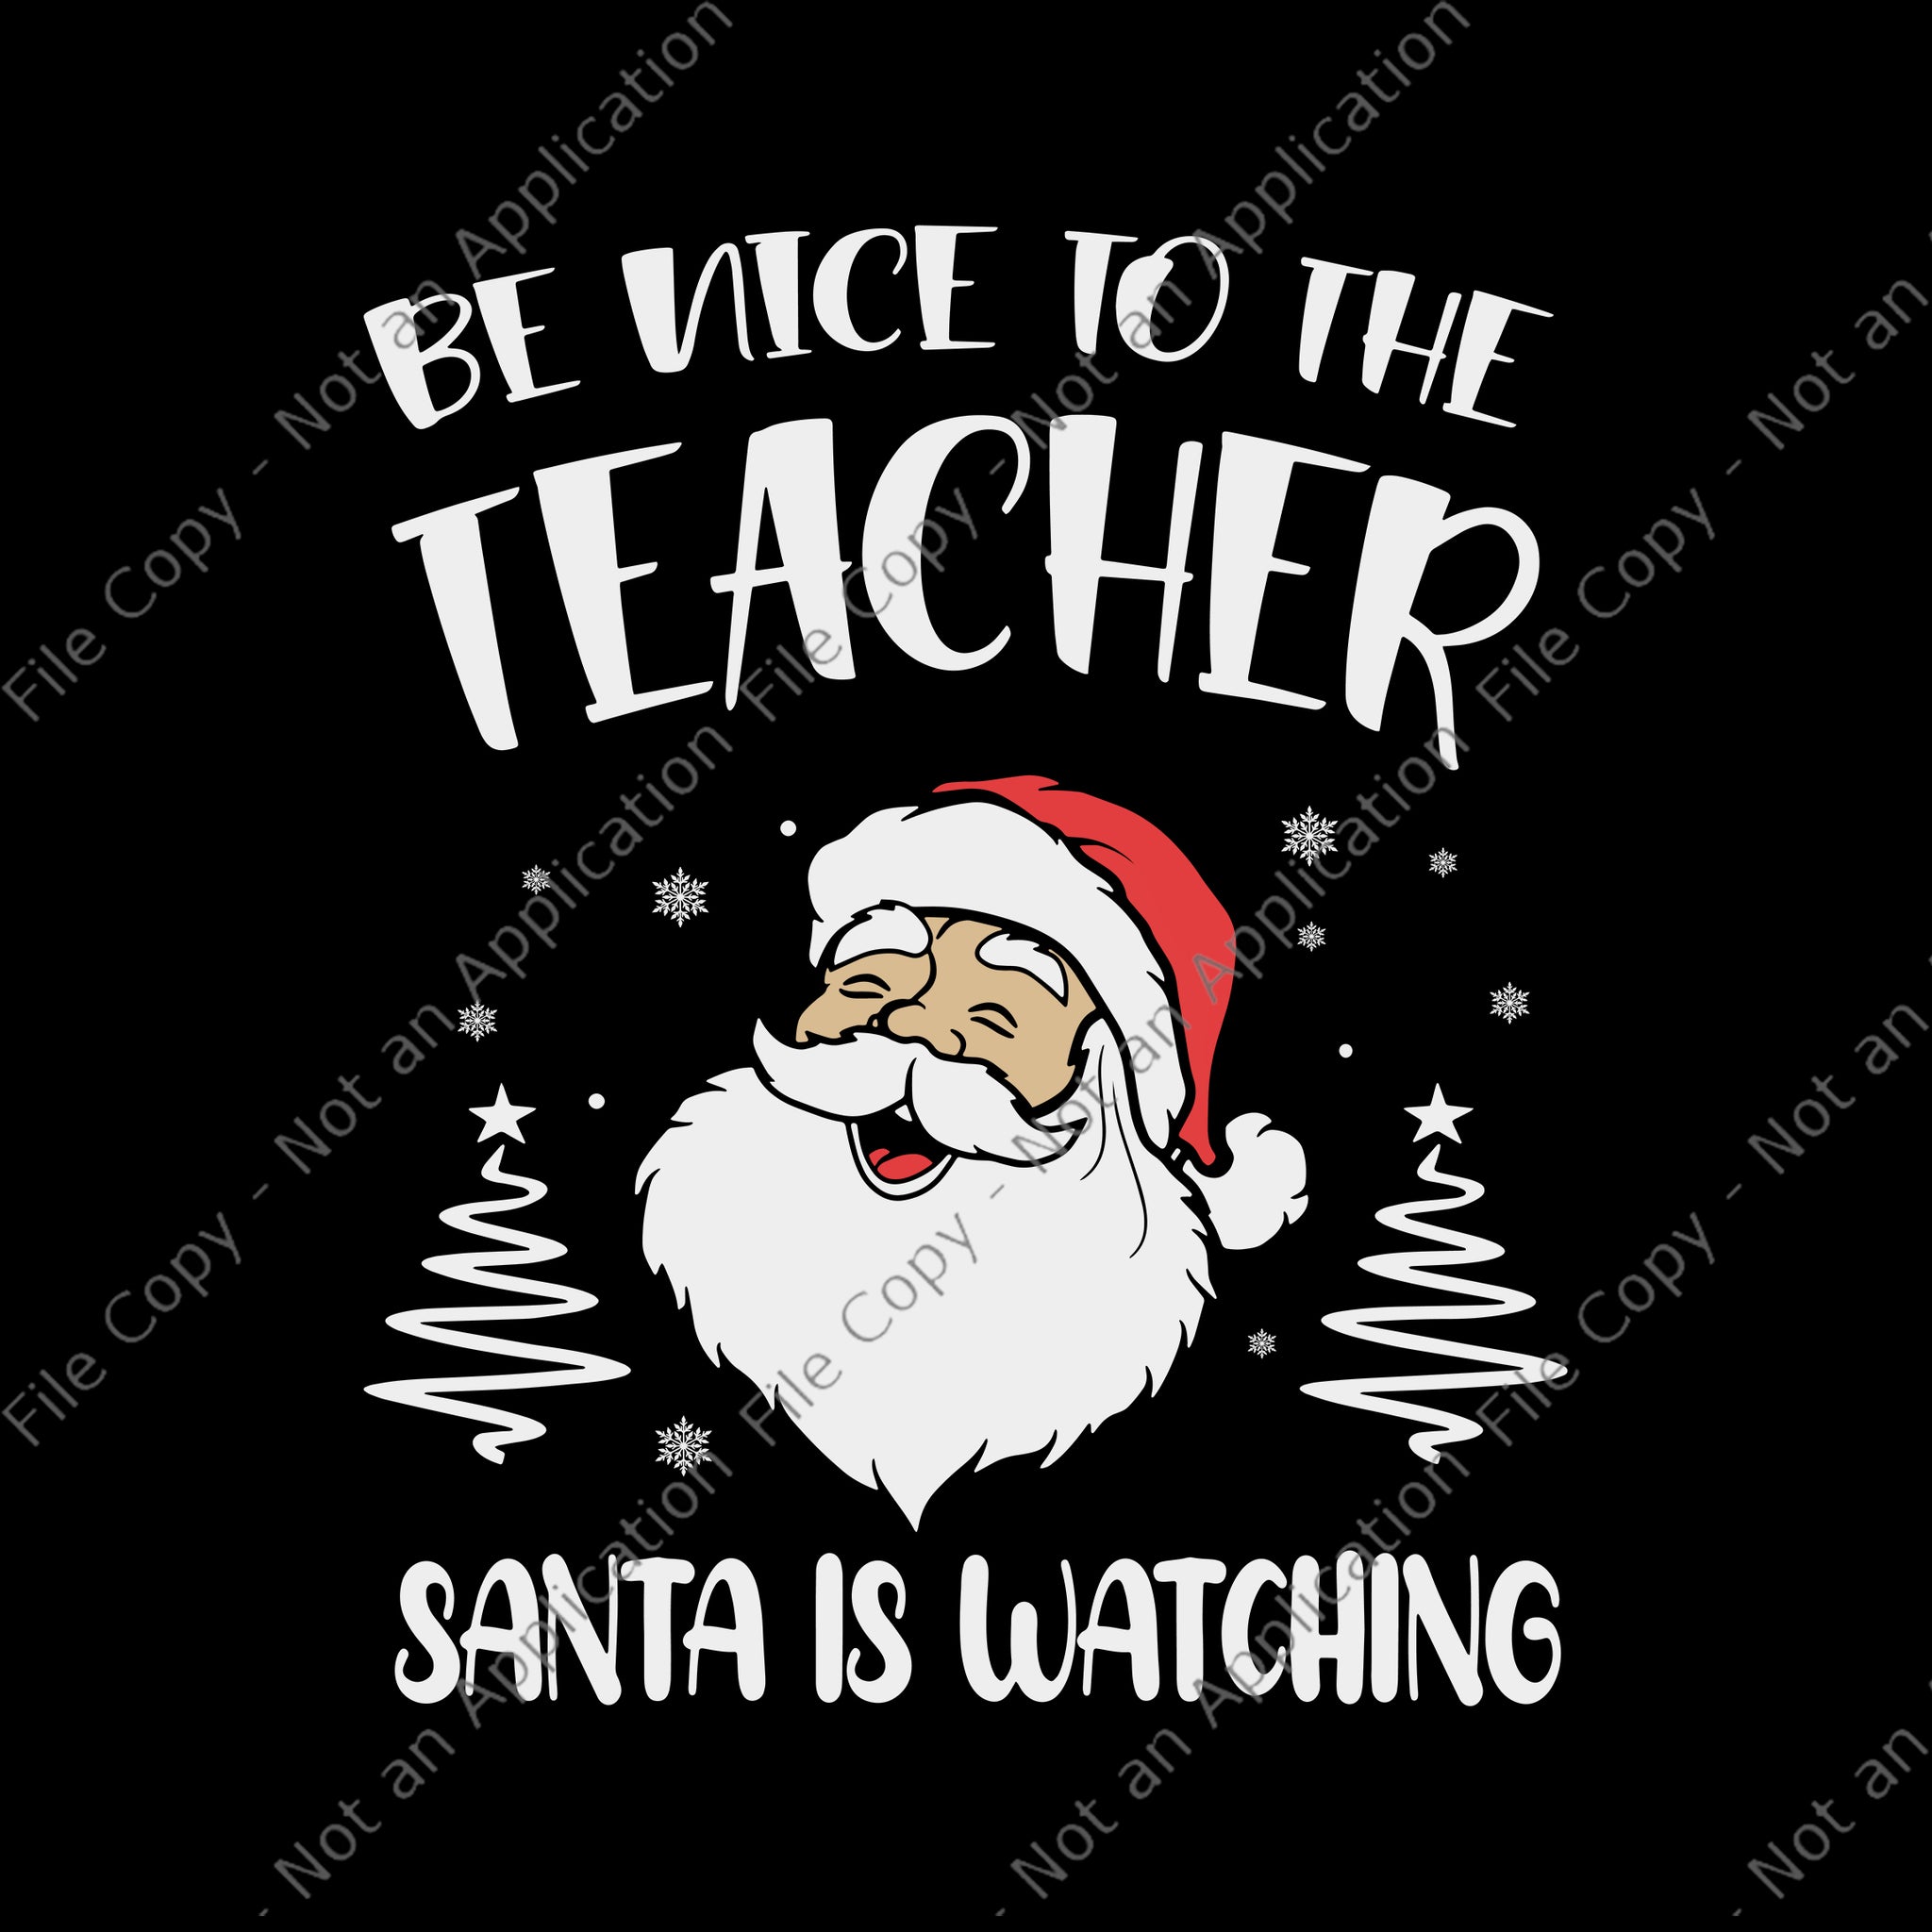 Be Nice To The Teacher Santa Is Watching Svg, Teacher Christmas Svg, Christmas Svg, Teacher Svg, Santa Svg,